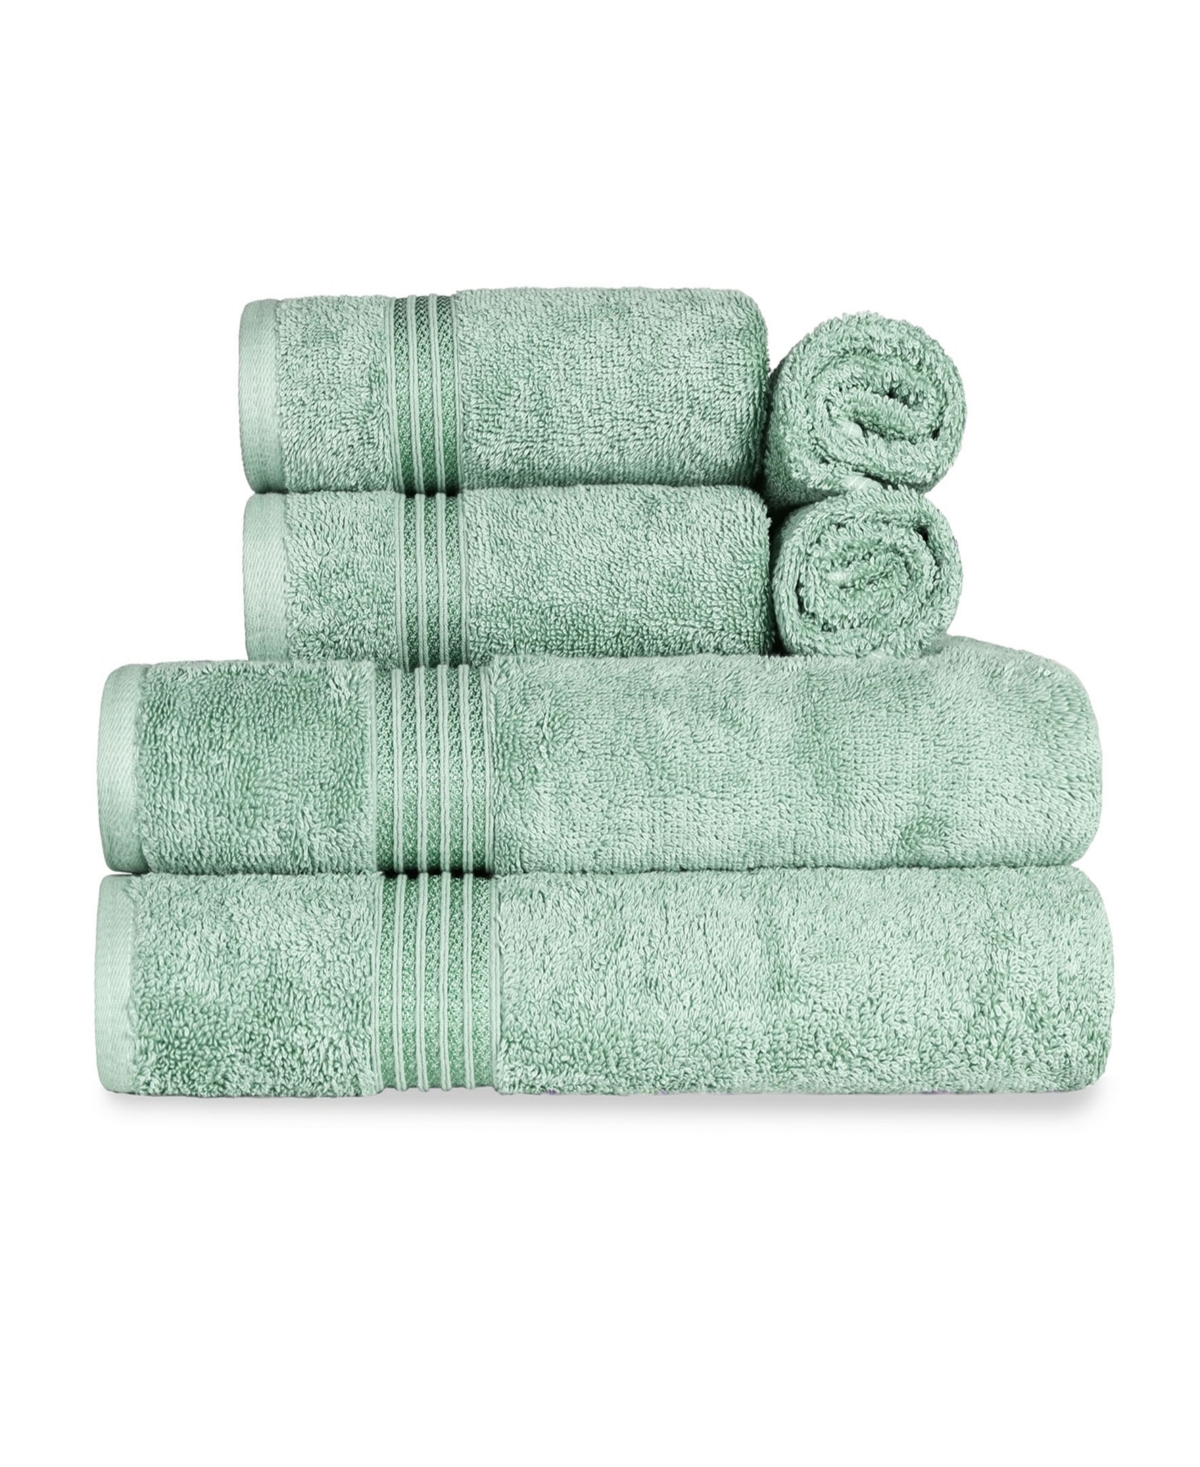 Superior Solid Quick Drying Absorbent 6 Piece Egyptian Cotton Assorted Towel Set Bedding In Sage